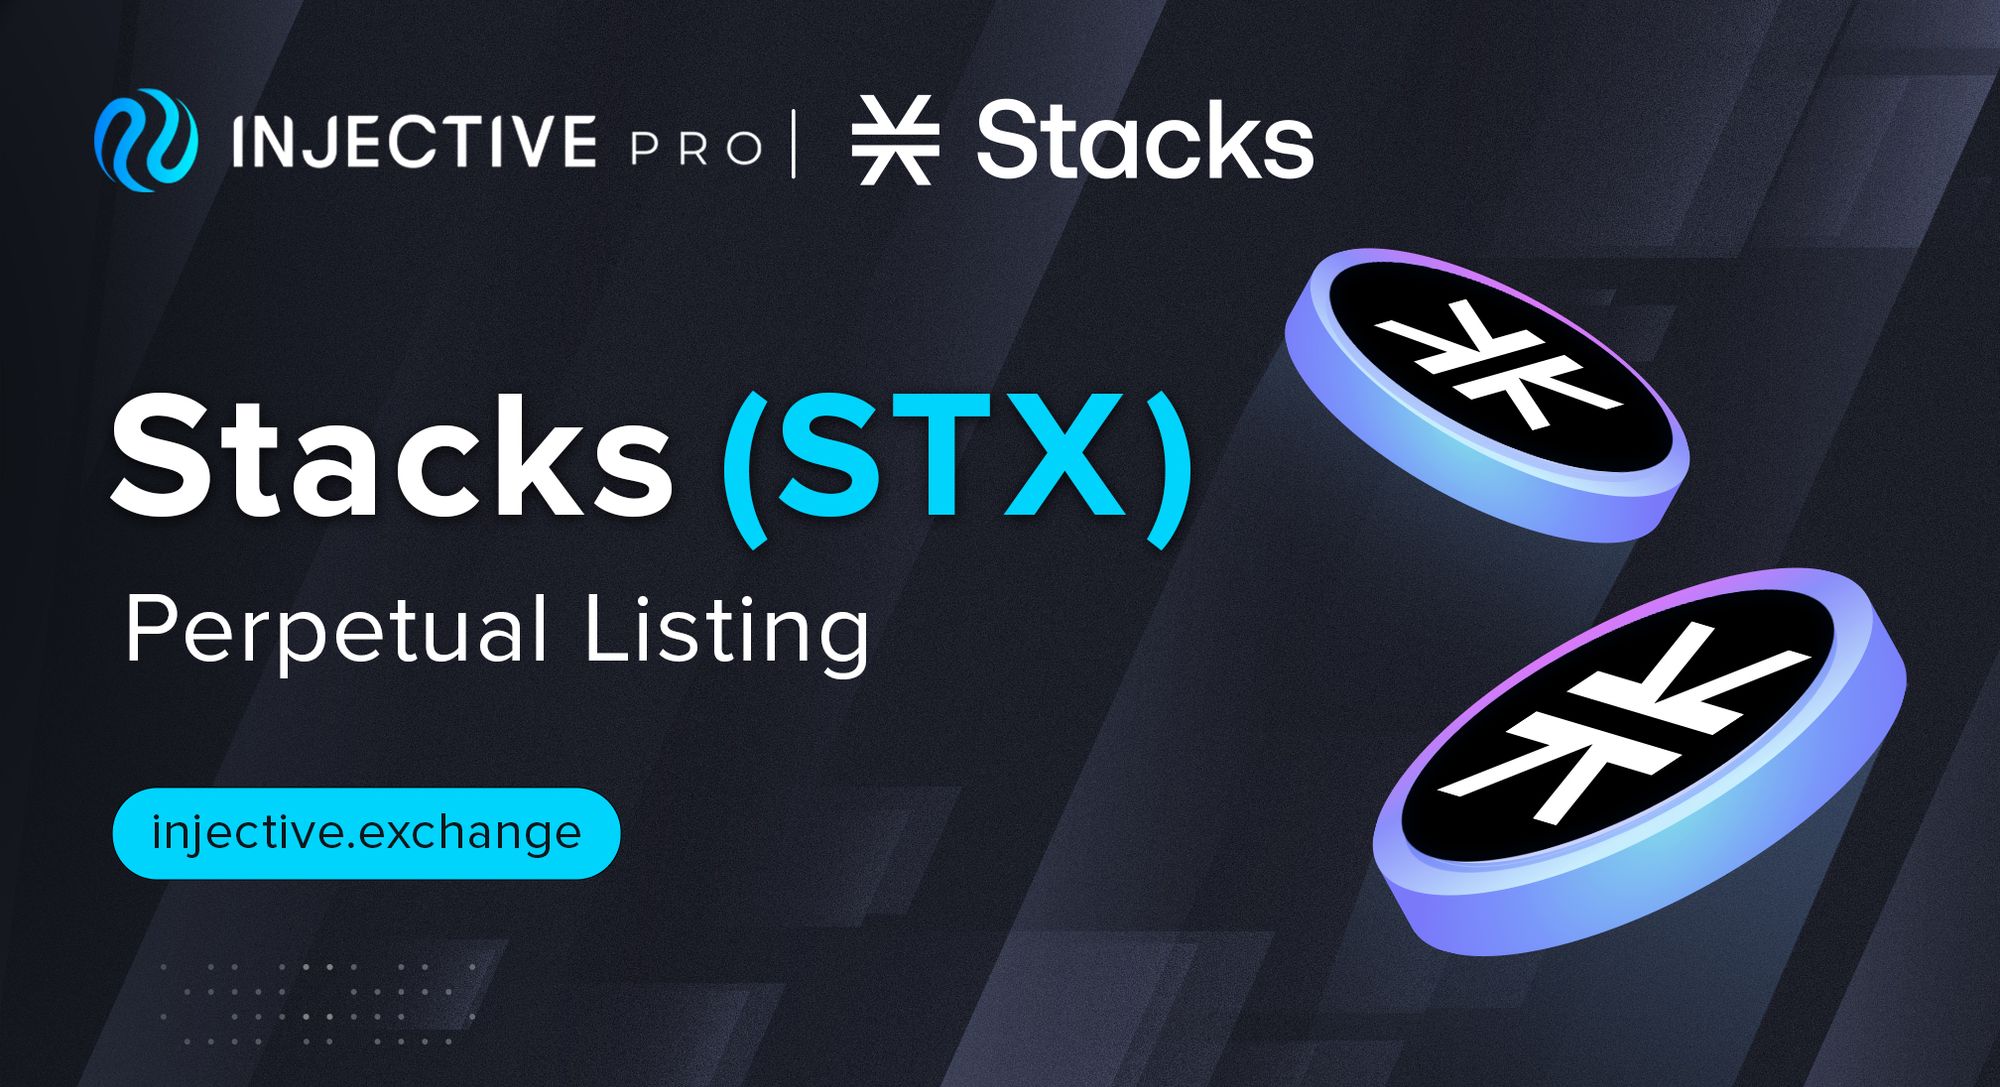 Decentralized Stacks (STX) Perpetual Futures Listing on Injective Pro